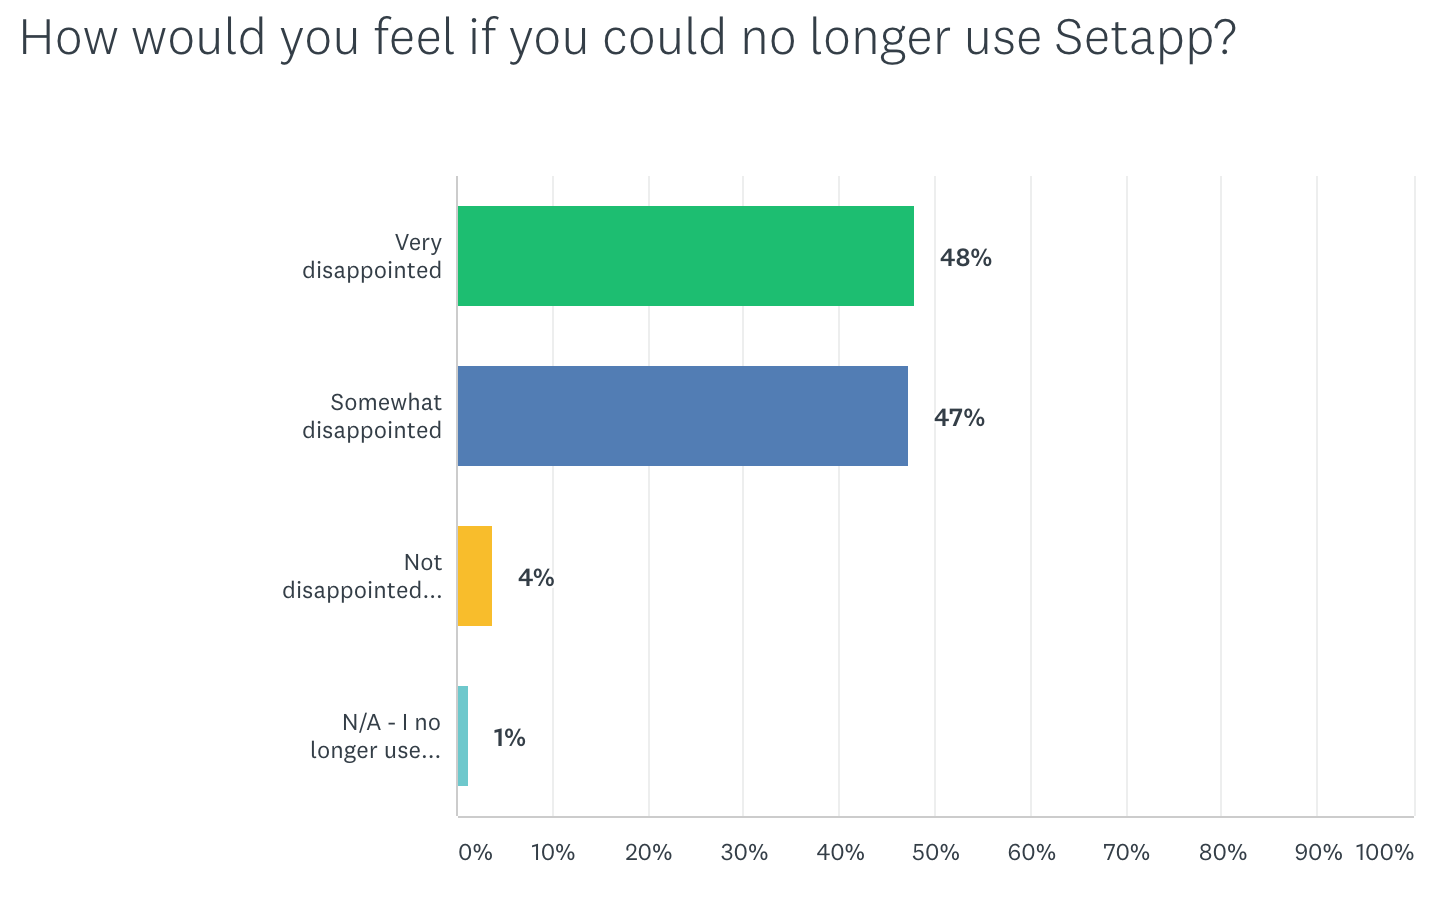 How would you feel if you could no longer use Setapp?